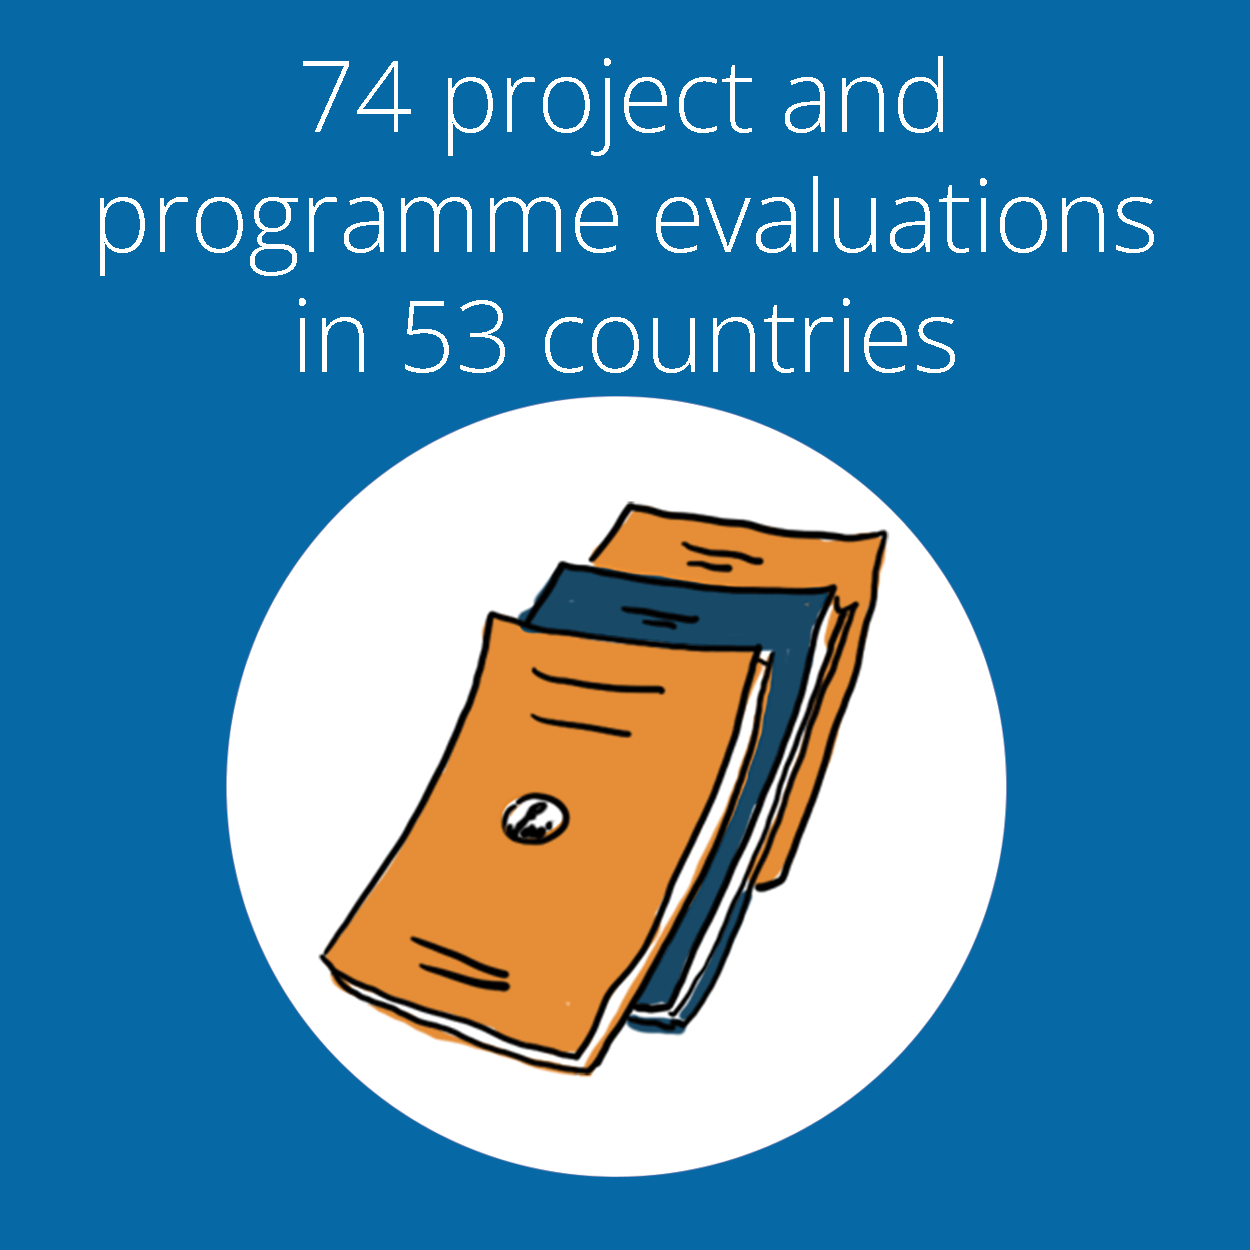 74 project and programme evaluations